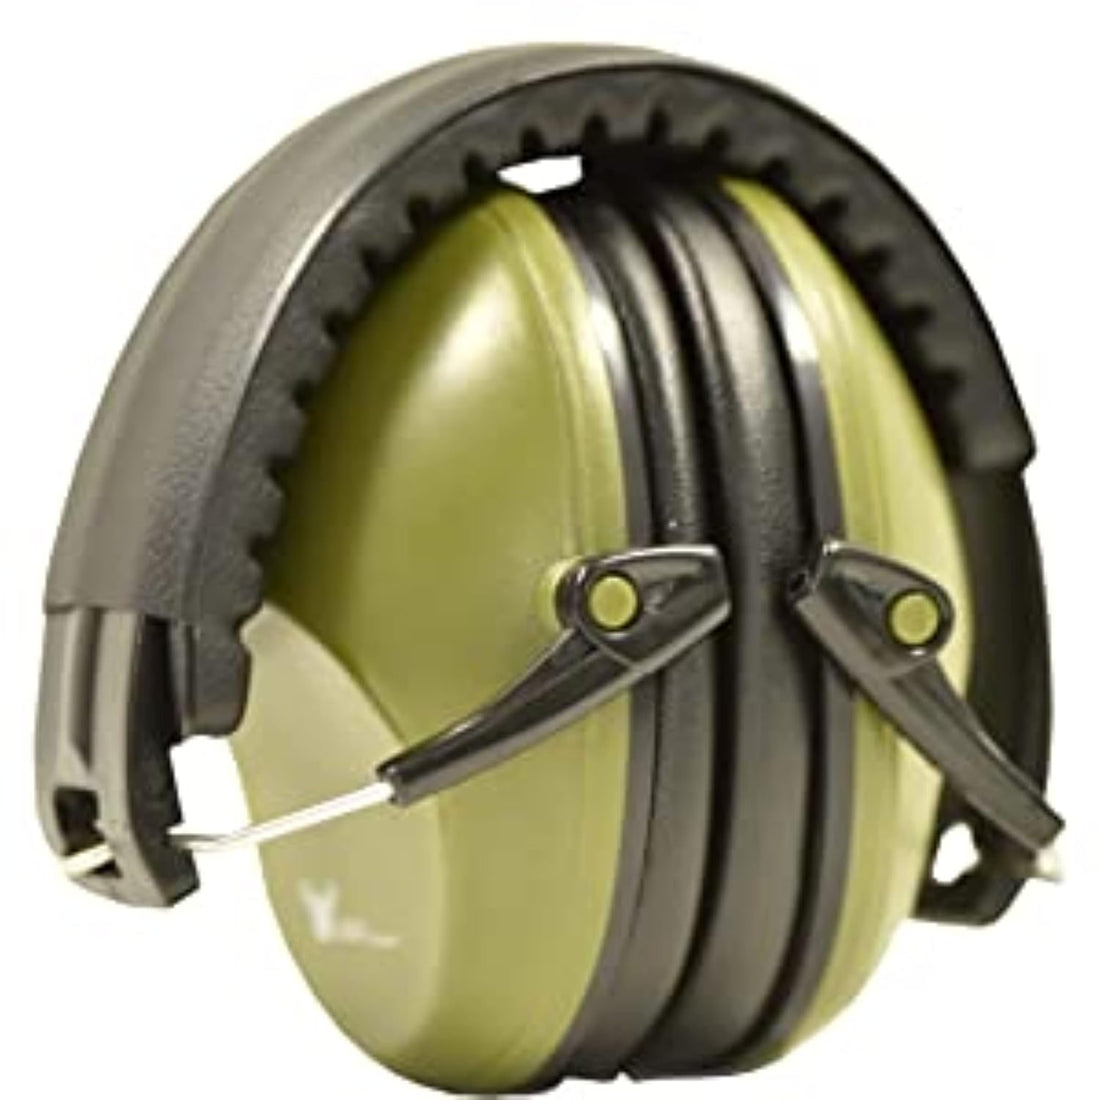 G & F Products Earmuff Hearing Protection with Low Profile Passive Folding Design 26Db SNR & Reduces up to 125Db Noise Reduction, For Both Adults & Kids Adjustable Headband, Army Green (13010AG)